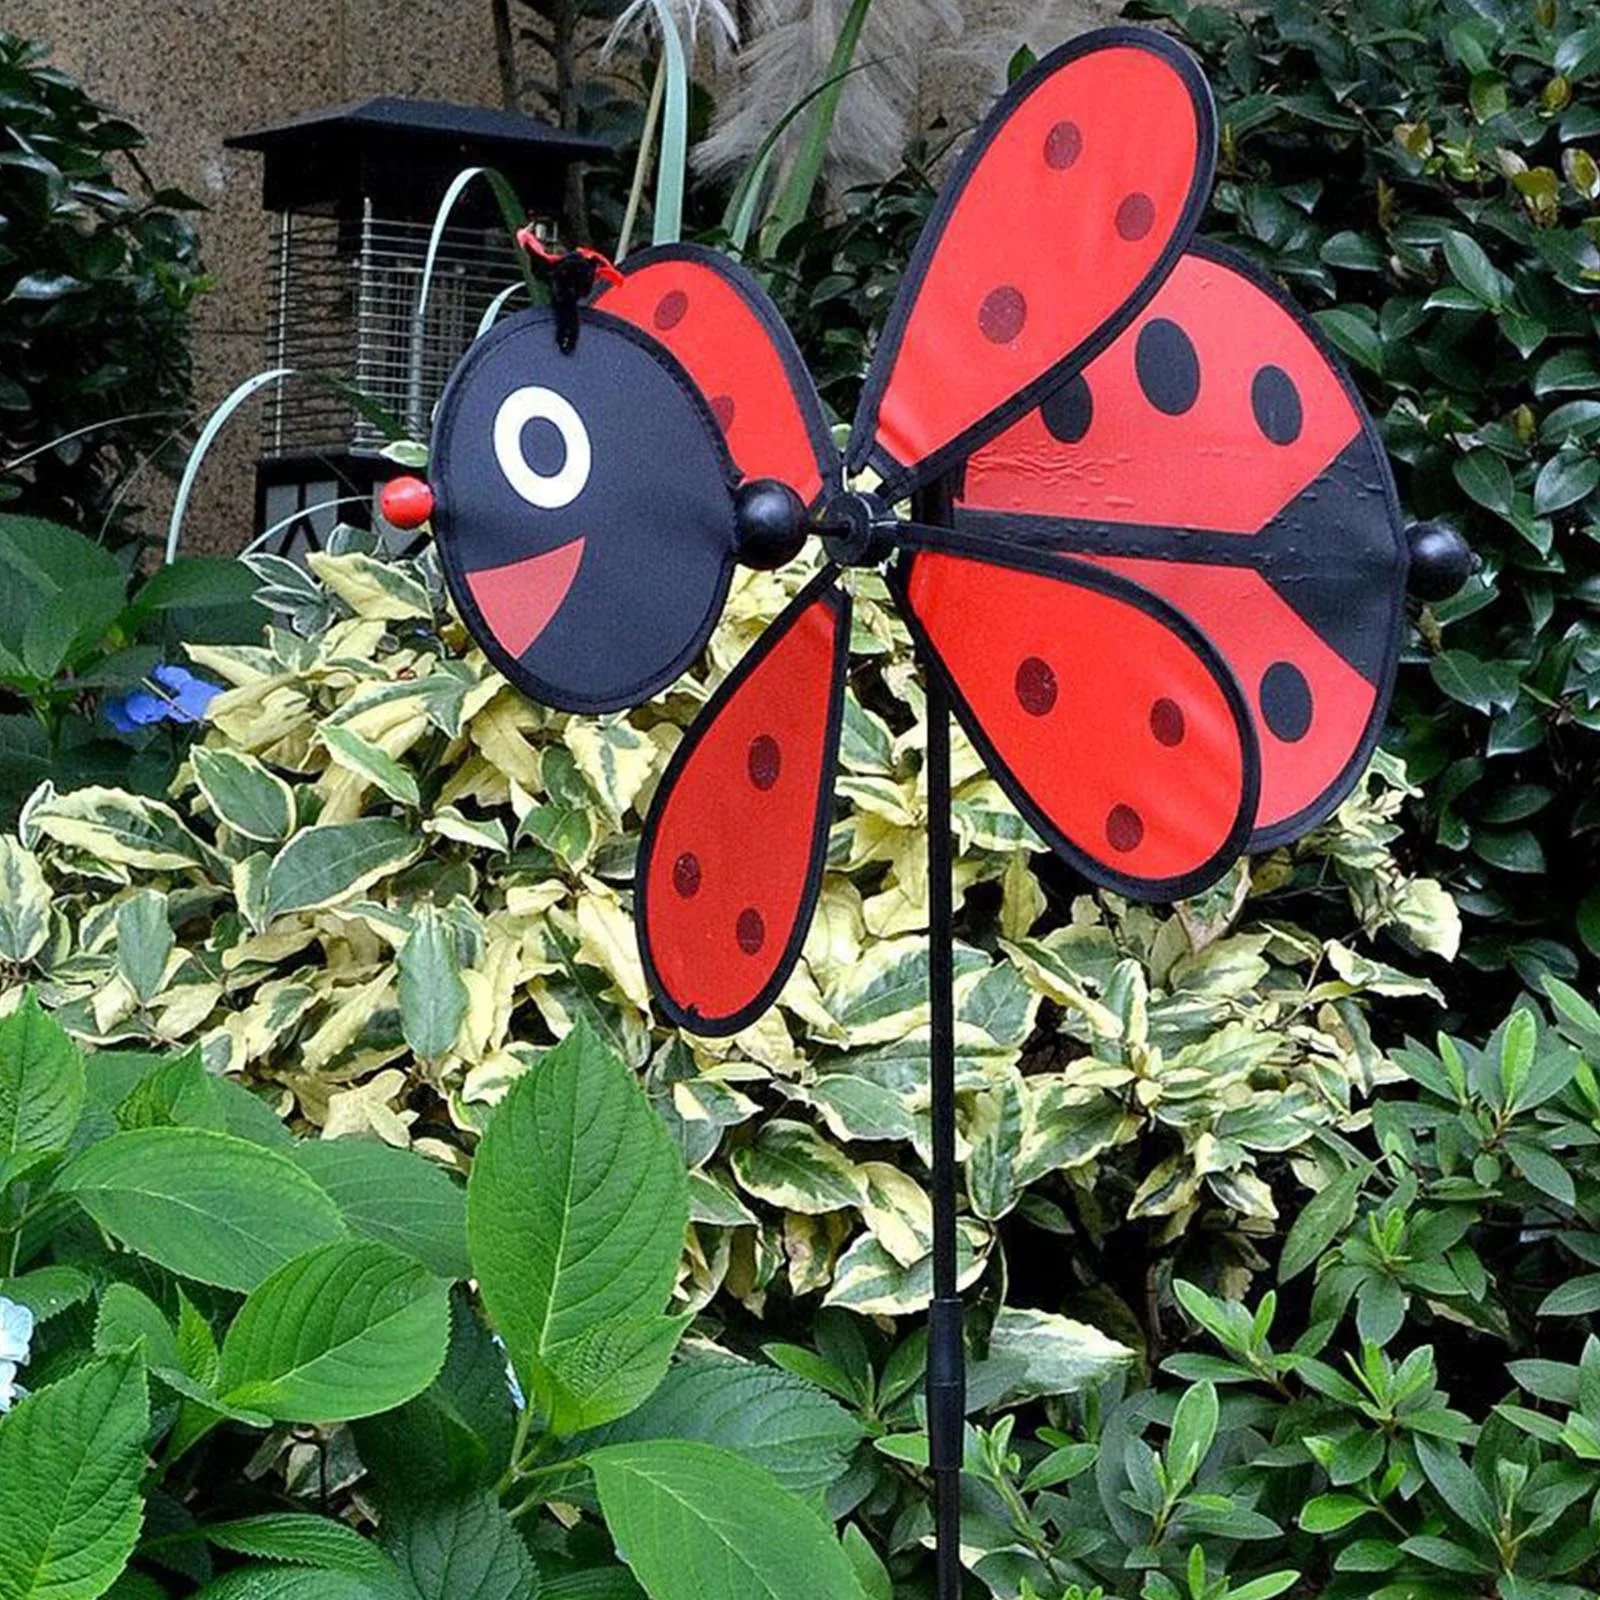 Details about   3D Animal Bee Ladybug Windmill Wind Spinner Yard Garden Outdoor Decor Toys-JBVO 